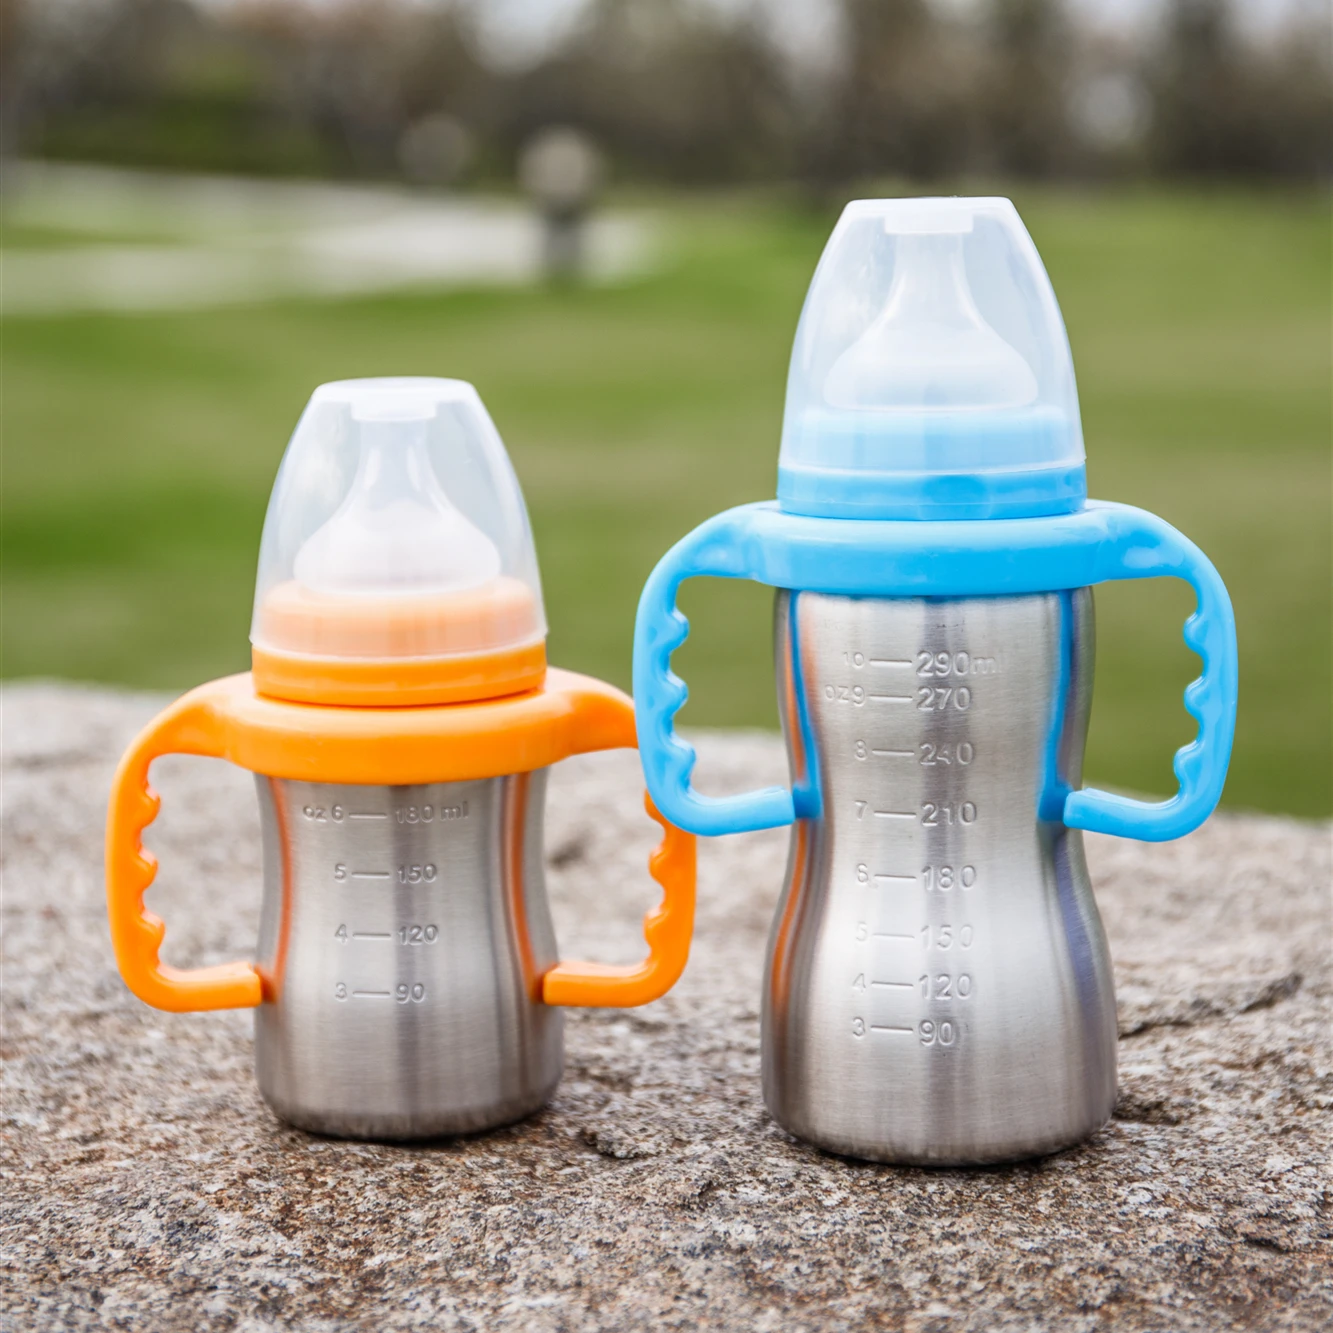 Baby feeding bottle double wall stainless steel high quality leak proof BPA free